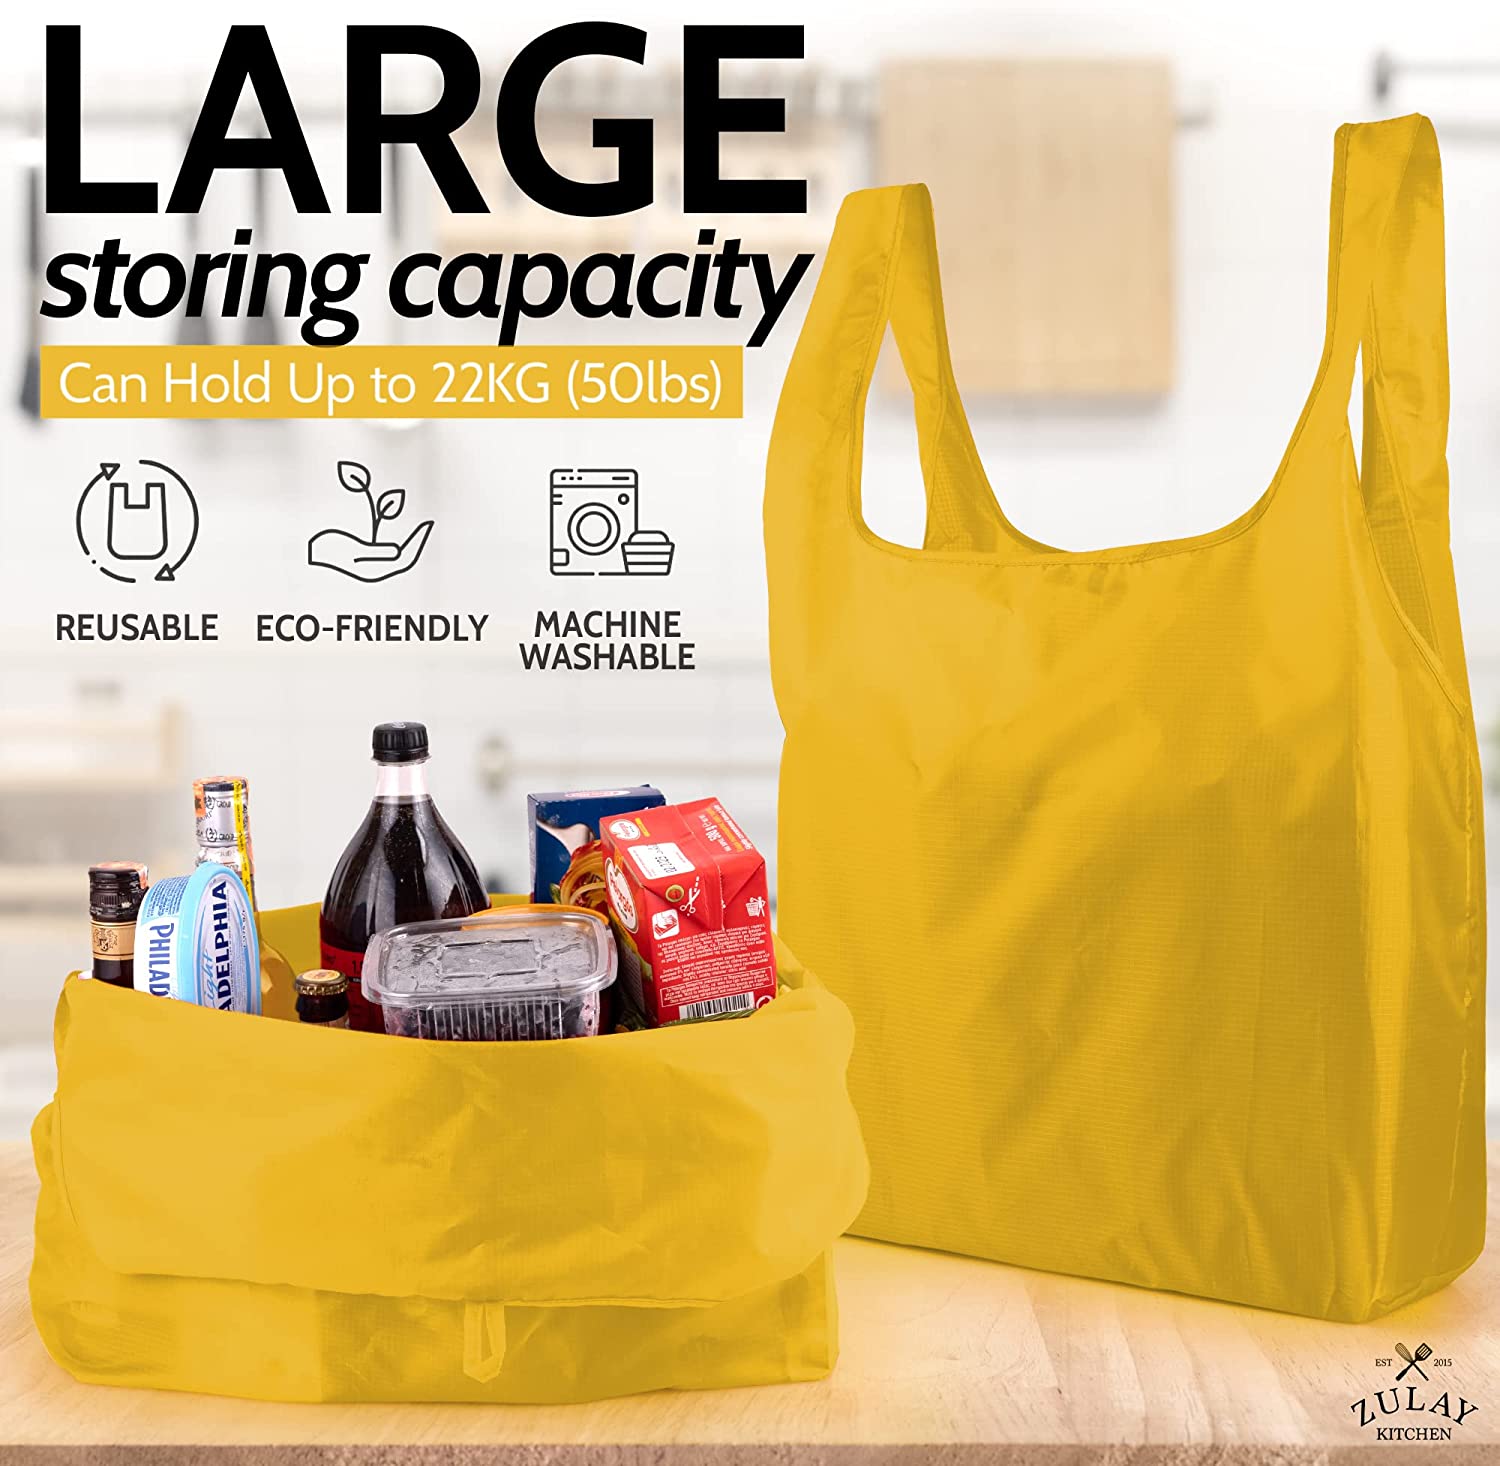 Zulay Kitchen Zulay 2 Pack Large Insulated Bag - Reusable Heavy Duty Insulated Food Delivery Bag with Longer Handles & Reinforced Bottom - Collapsible